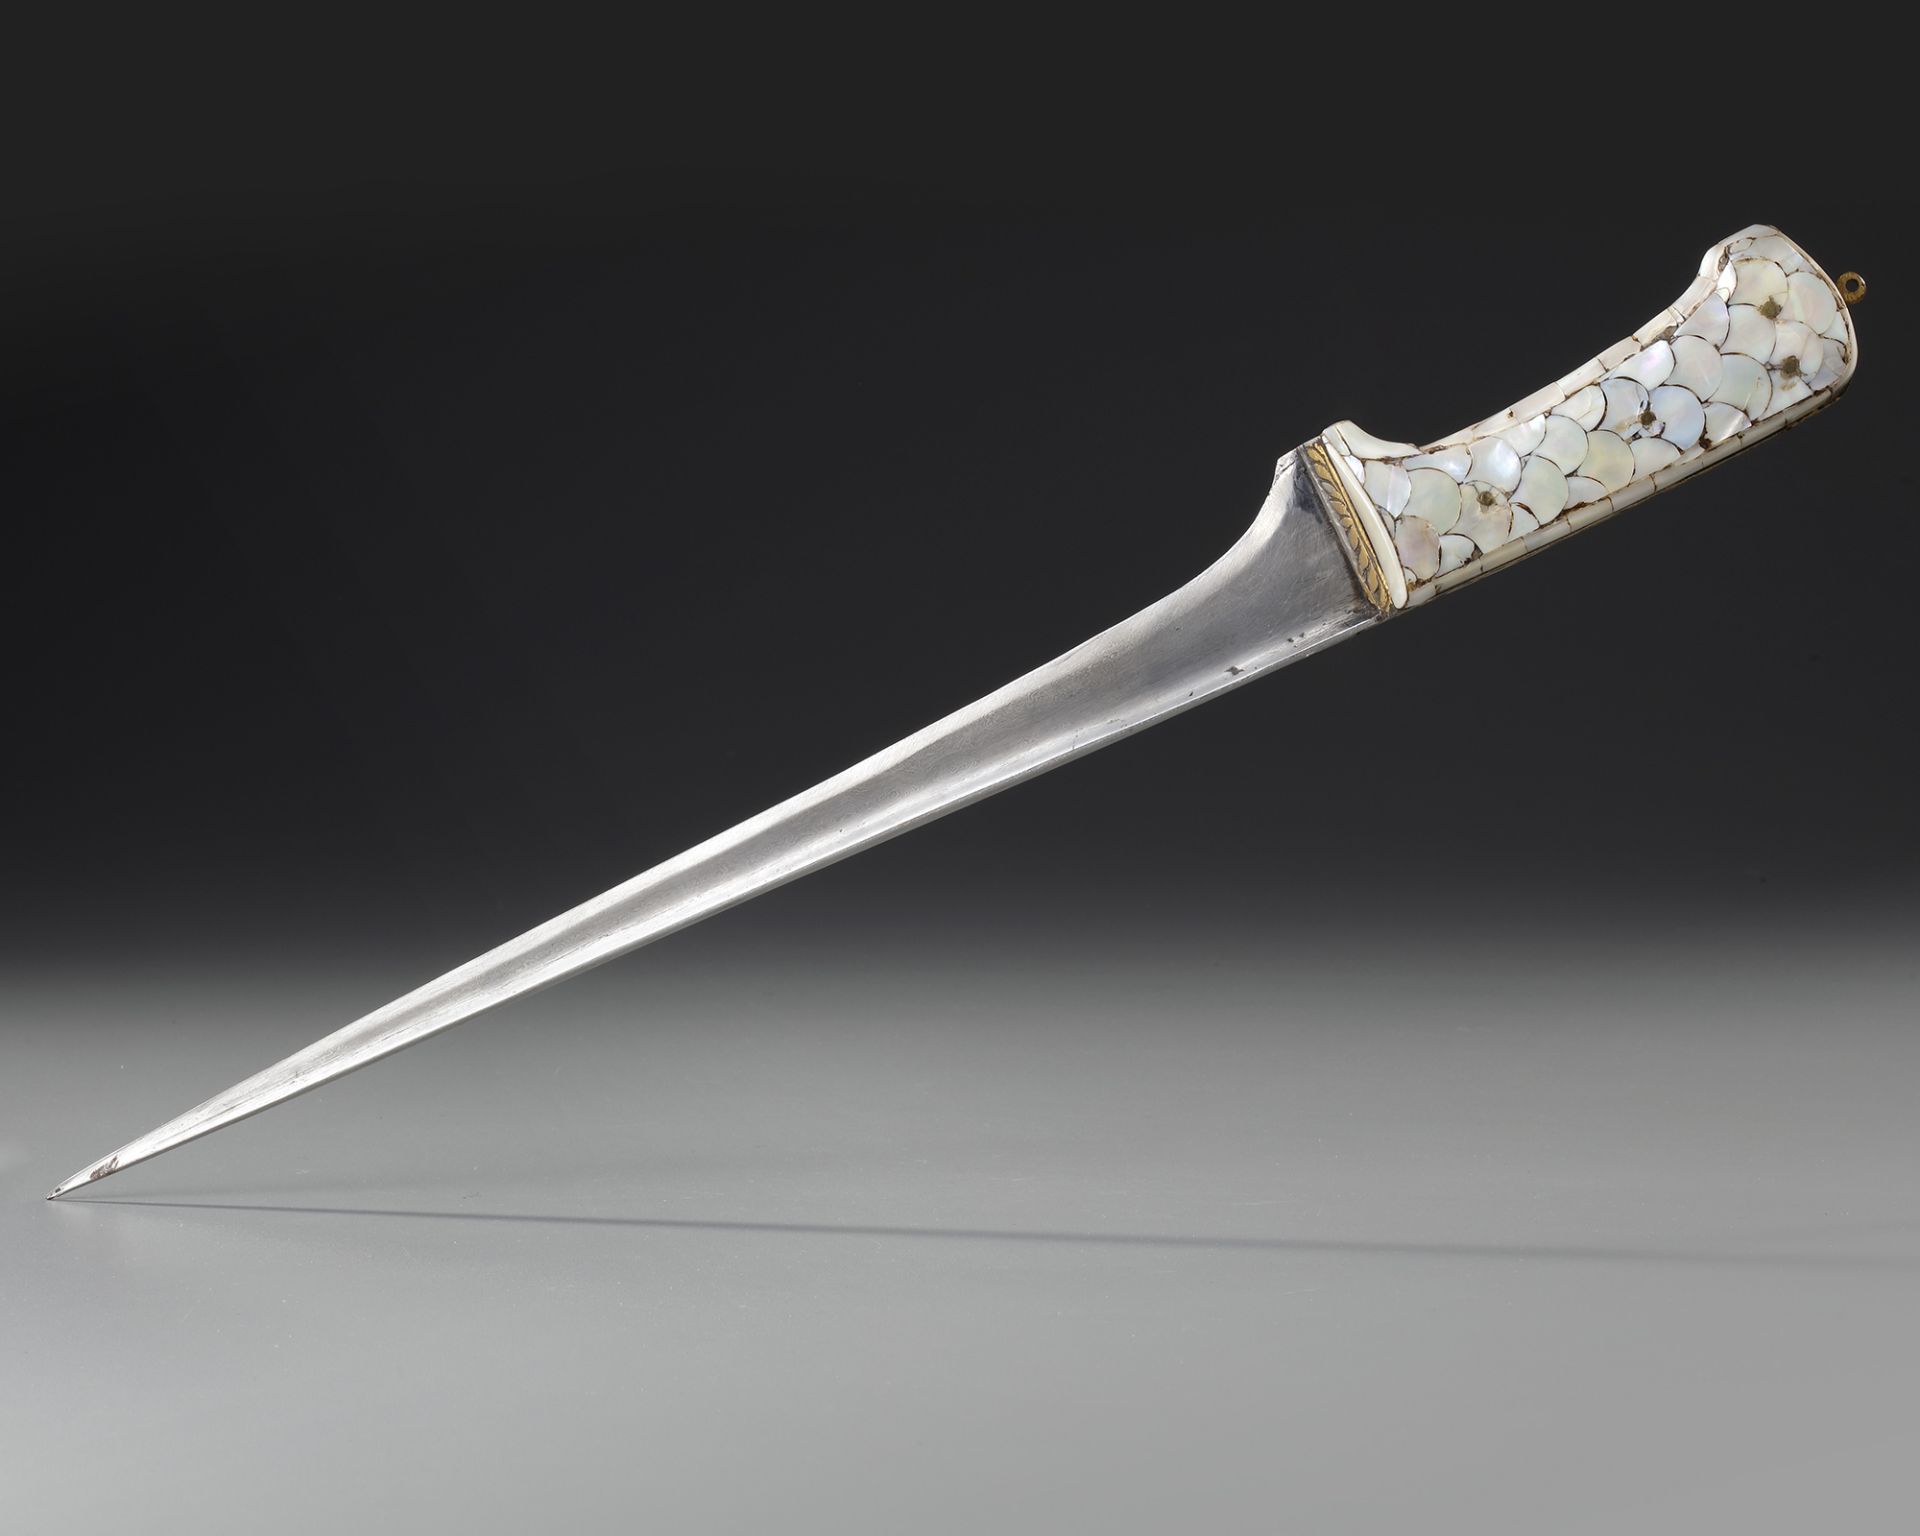 A MOTHER-OF-PEARL HILTED DAGGER (PESHKABZ), INDIA, GUJARAT, 18TH CENTURY - Image 2 of 3